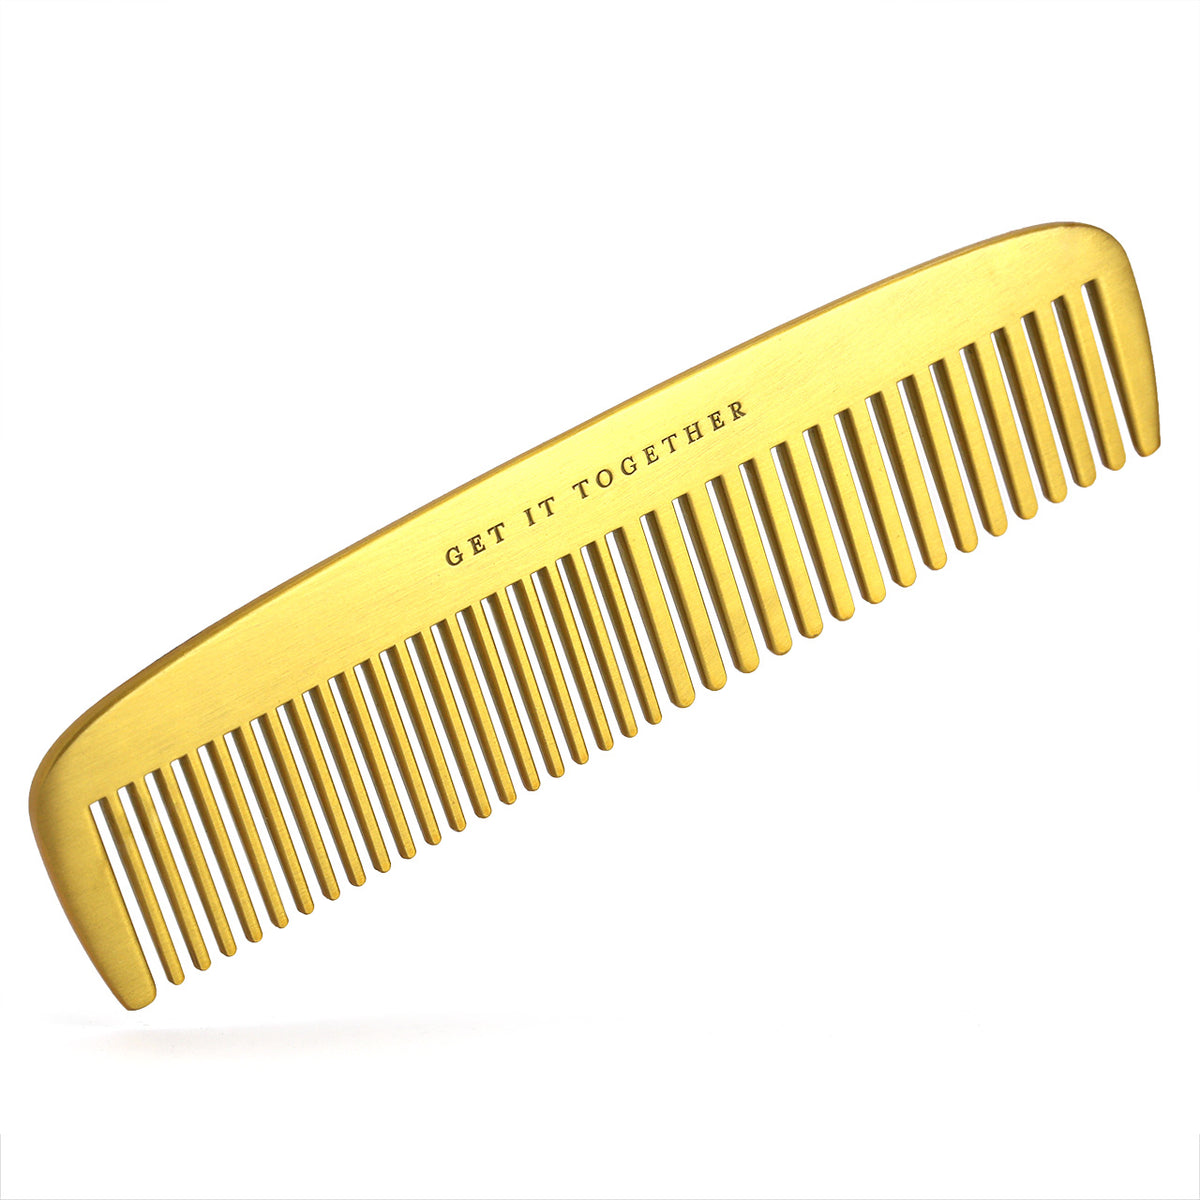 &quot;Get it Together&quot; engraved Brass comb